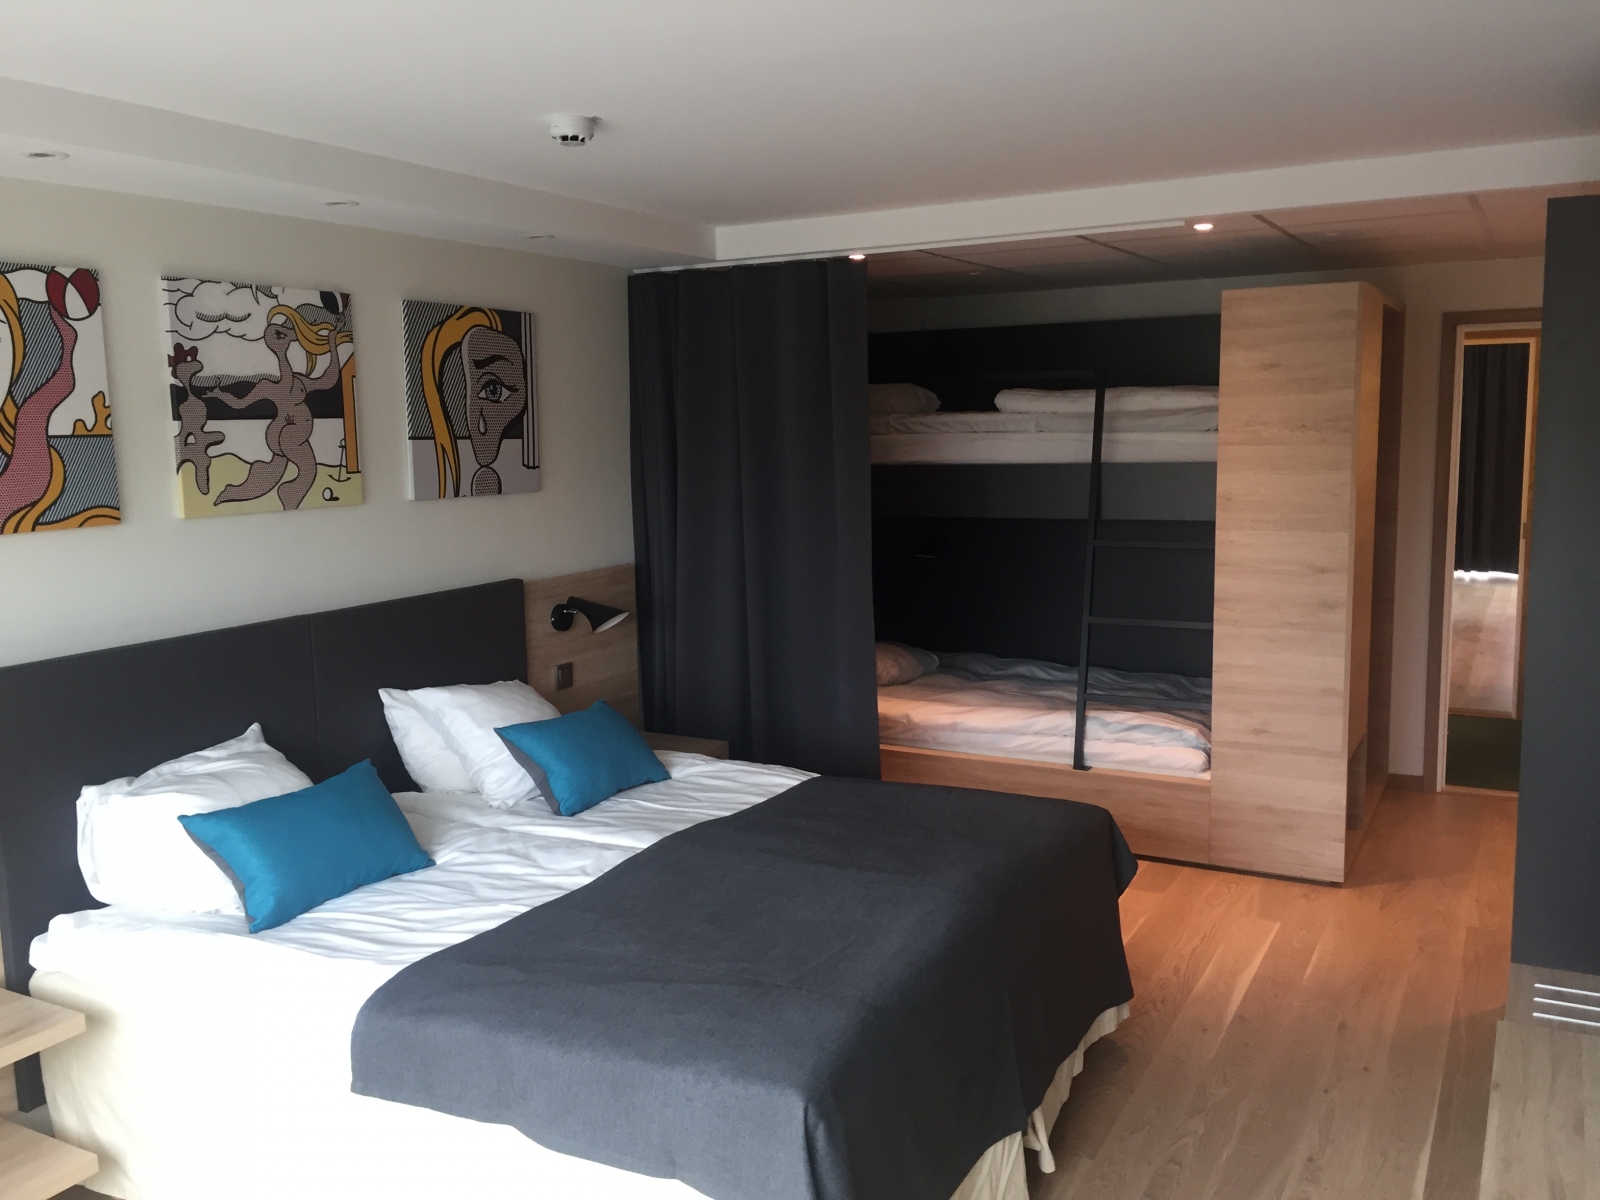 Best Western Hotell Halland <br/>118.00 ew <br/> <a href='http://vakantieoplossing.nl/outpage/?id=150fff42c2516a64097057f64e7e98a1' target='_blank'>View Details</a>